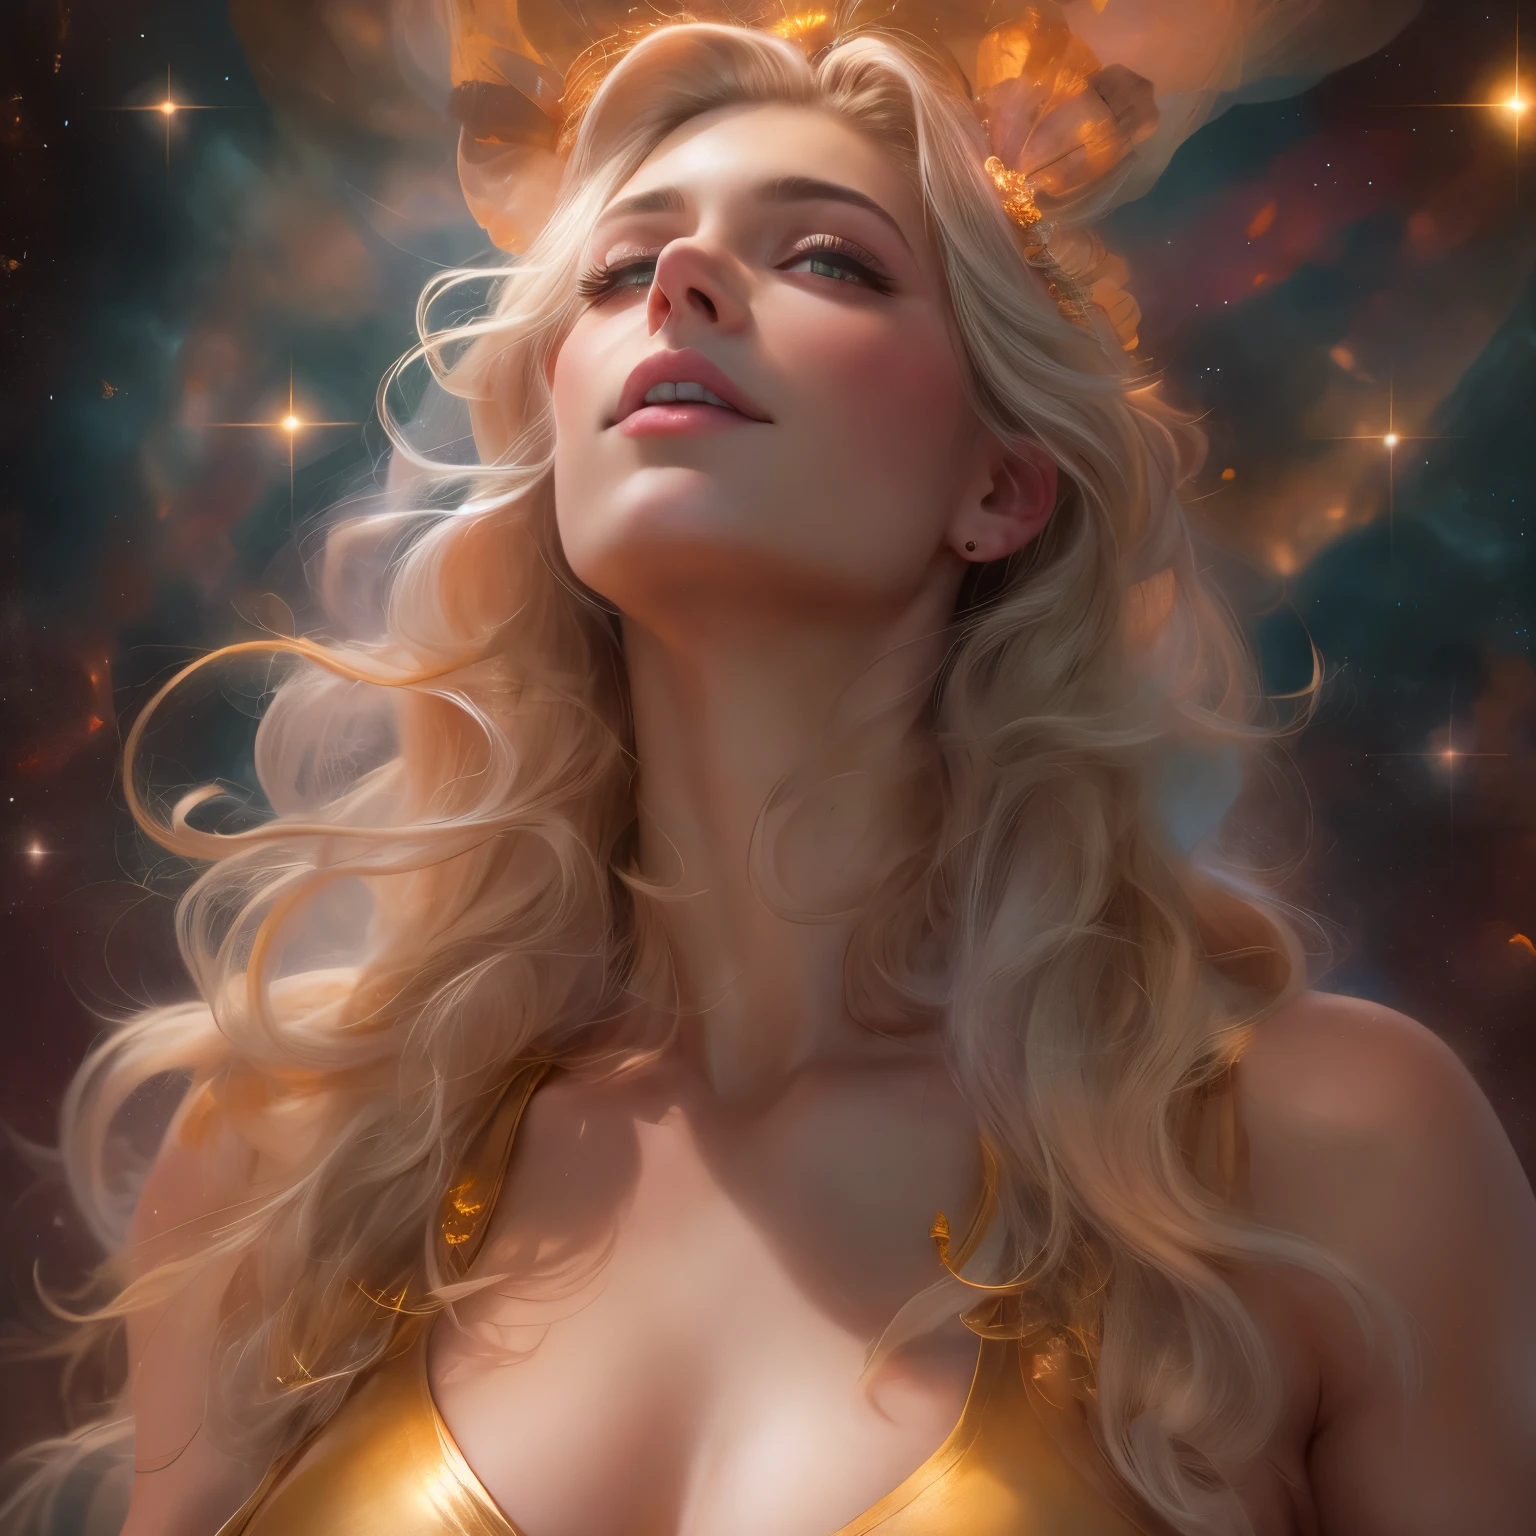 (Highest Quality,High Resolution,Masterpiece:1.2),Ultra-Detailed,(Realistic,Photorealistic,Photorealistic:1.37),(Highest Quality,High Resolution), Goddess of the Universe, Huge astral-bodied goddess watching over the universe,(Perfectly sculpted body:1. 4), Glowing golden eyes, long eyelashes, luscious golden hair, breathtaking (perfect nudity, moist skin, perfect breasts, beautiful areola and nipples: 1. 4), stars, nebulae and galactic cosmic background, soft and soothing colors, faintly drifting stardust, vivid and atmospheric lighting, transcendent and otherworldly atmosphere, (NSFW: 1.4).